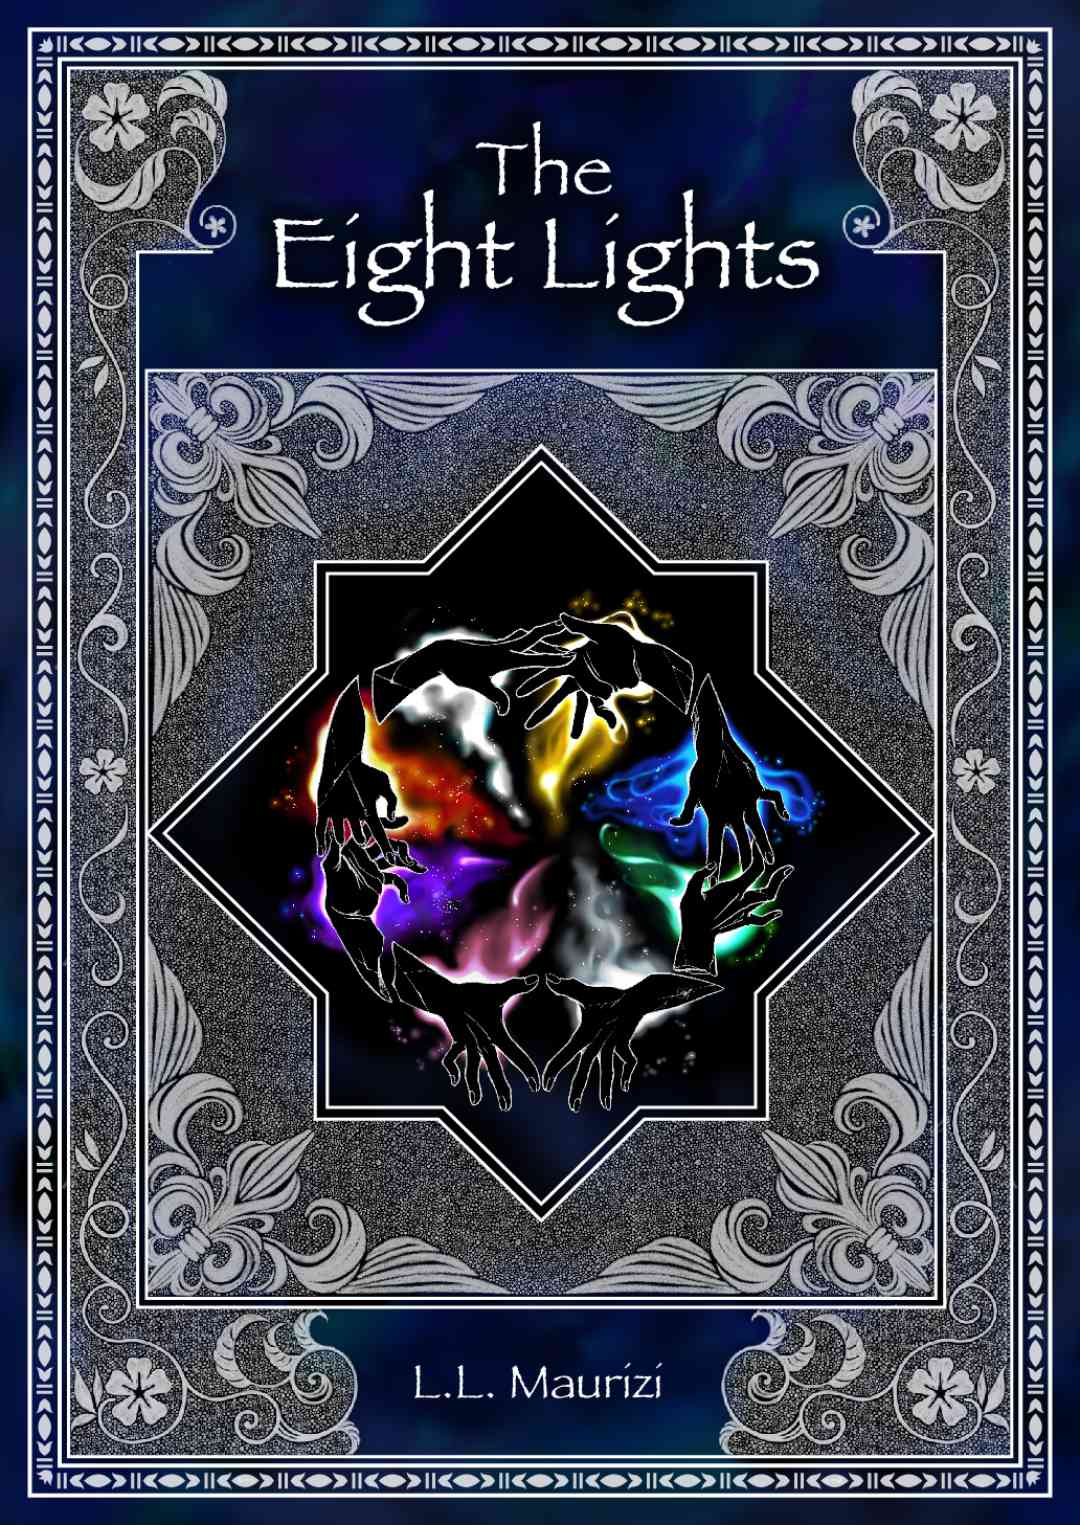 The Eight Lights cover design